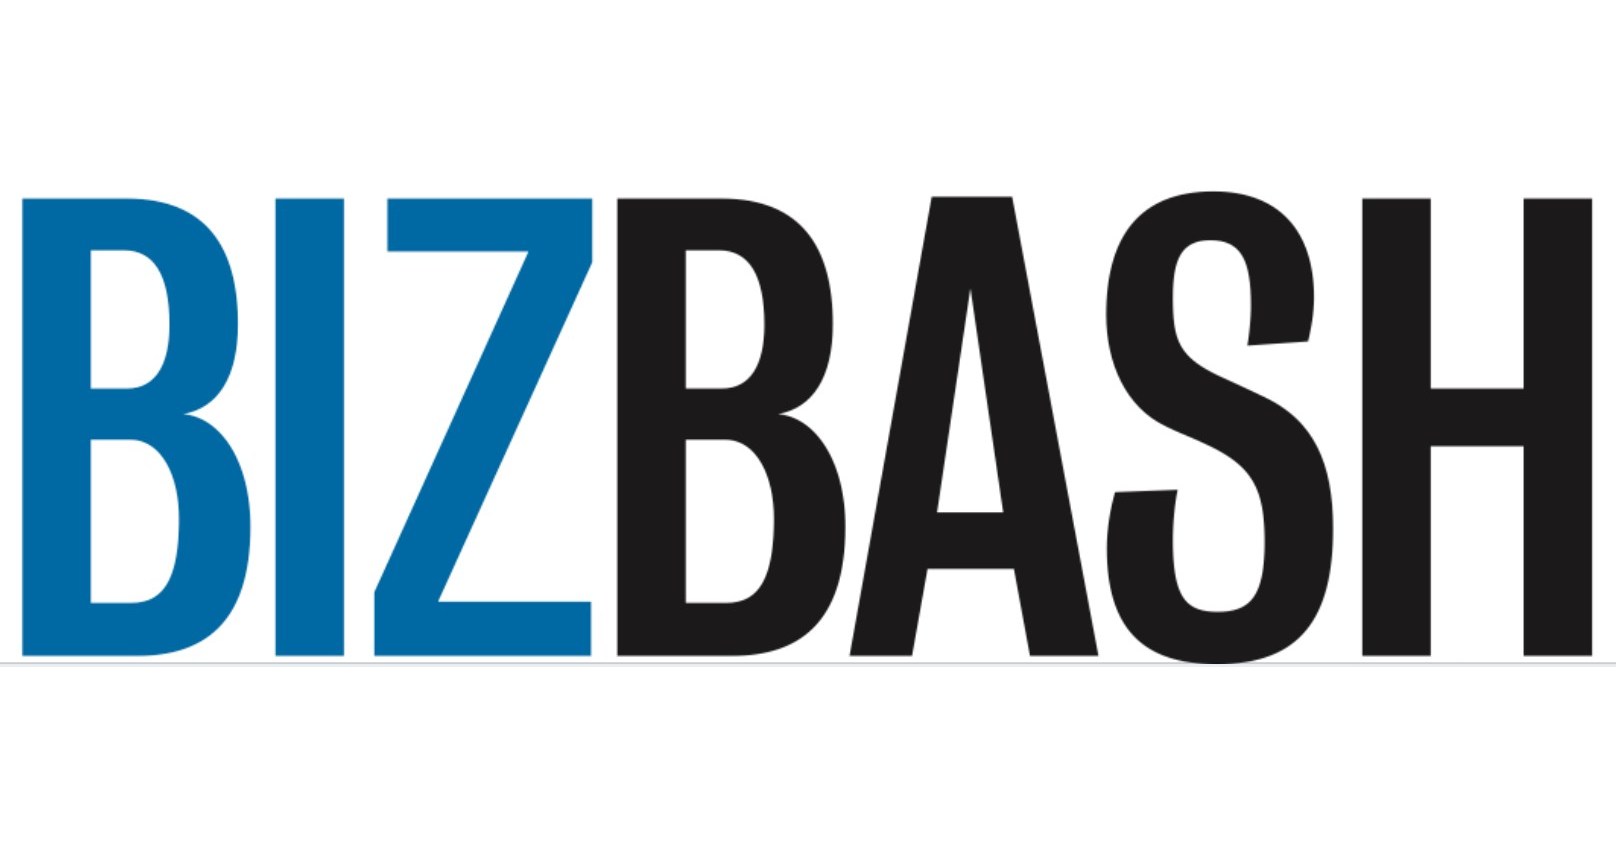 Tarsus Combines BizBash and Connect's Media Assets, Creating Event and Meeting Industry Powerhouse